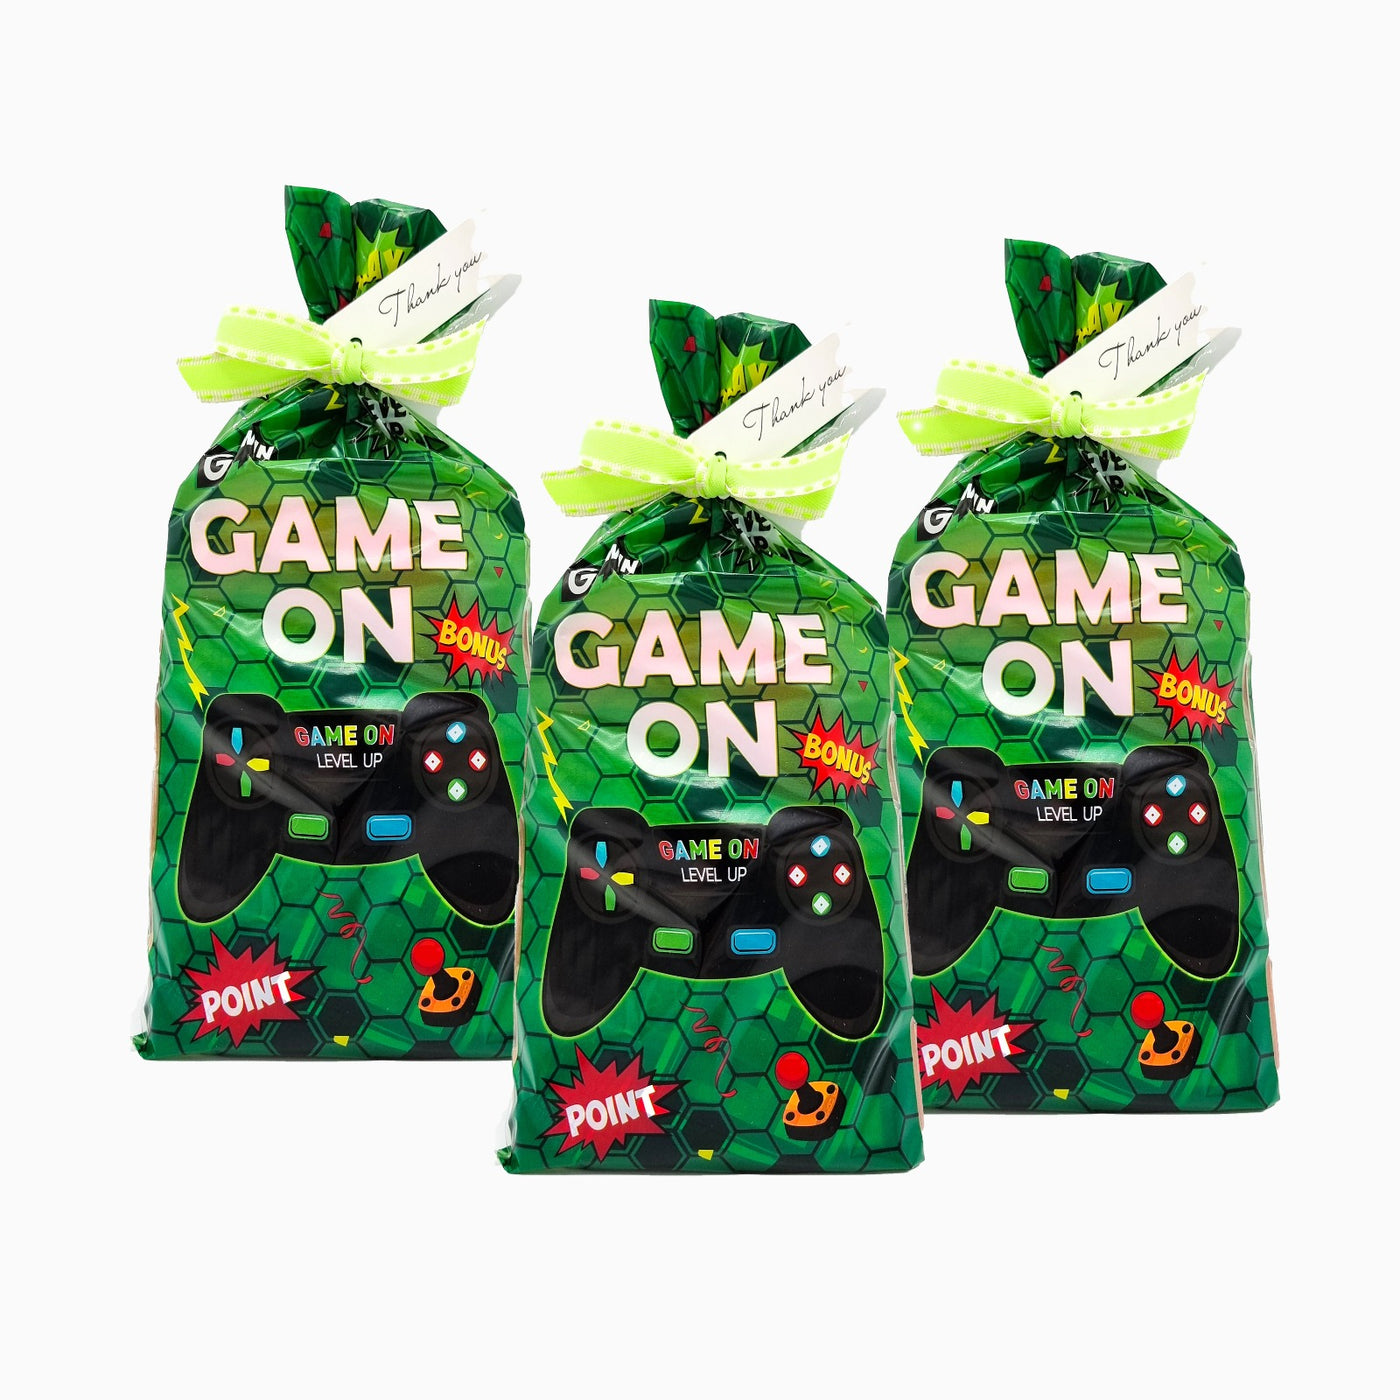 Pre Filled Birthday Gamer Party Goody Bags For Children With Gaming Toys And Sweets, Party Favours.